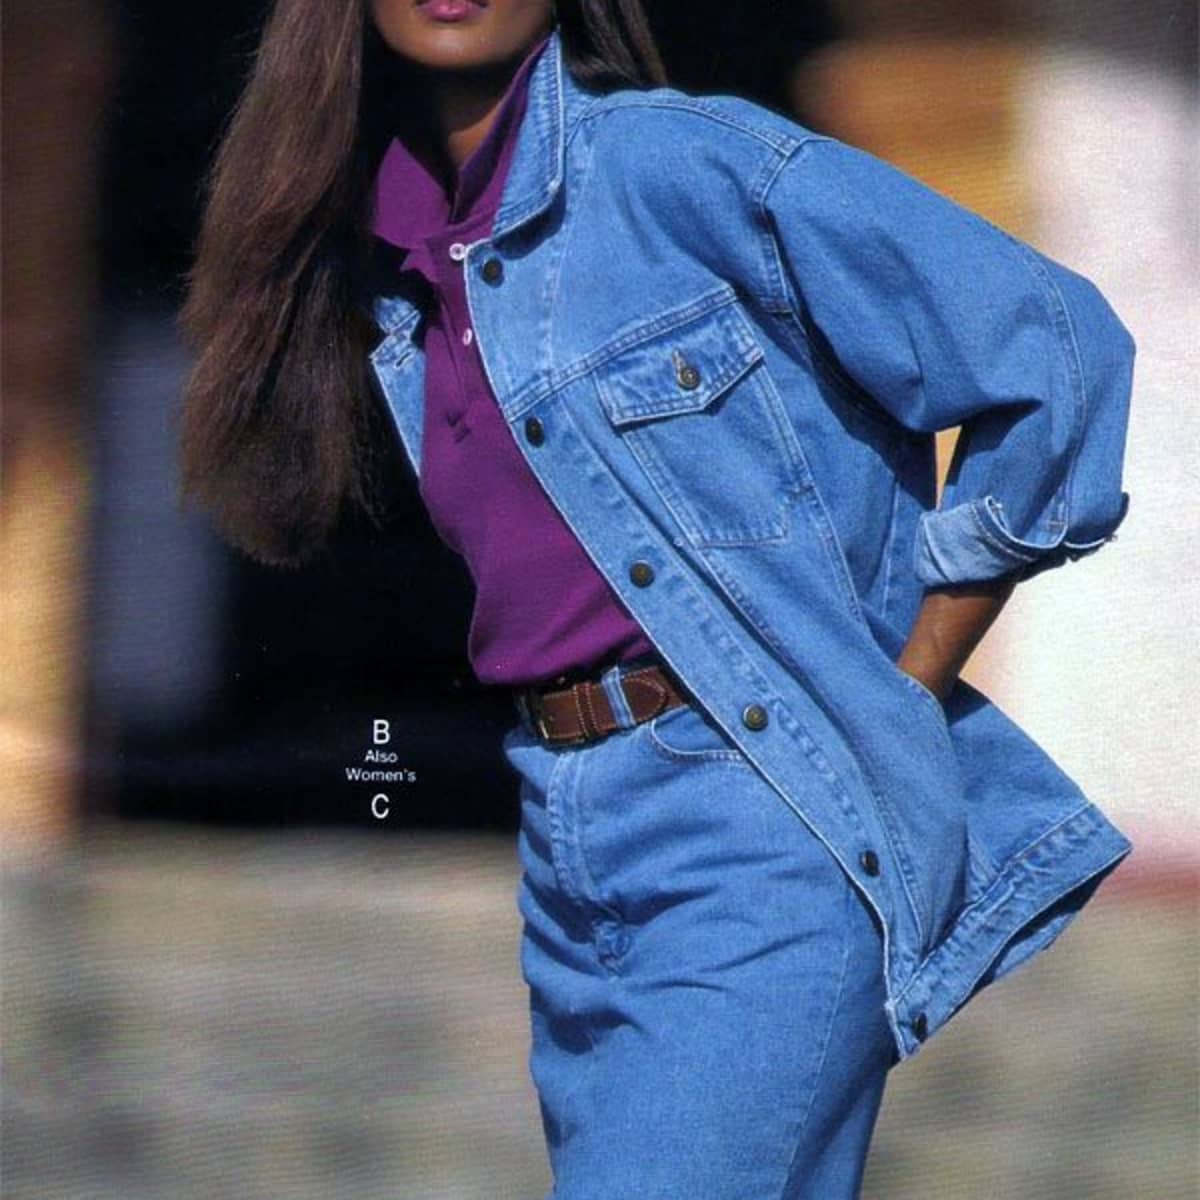 90s Fashion for Women - Female Fashion Trends of the Nineties